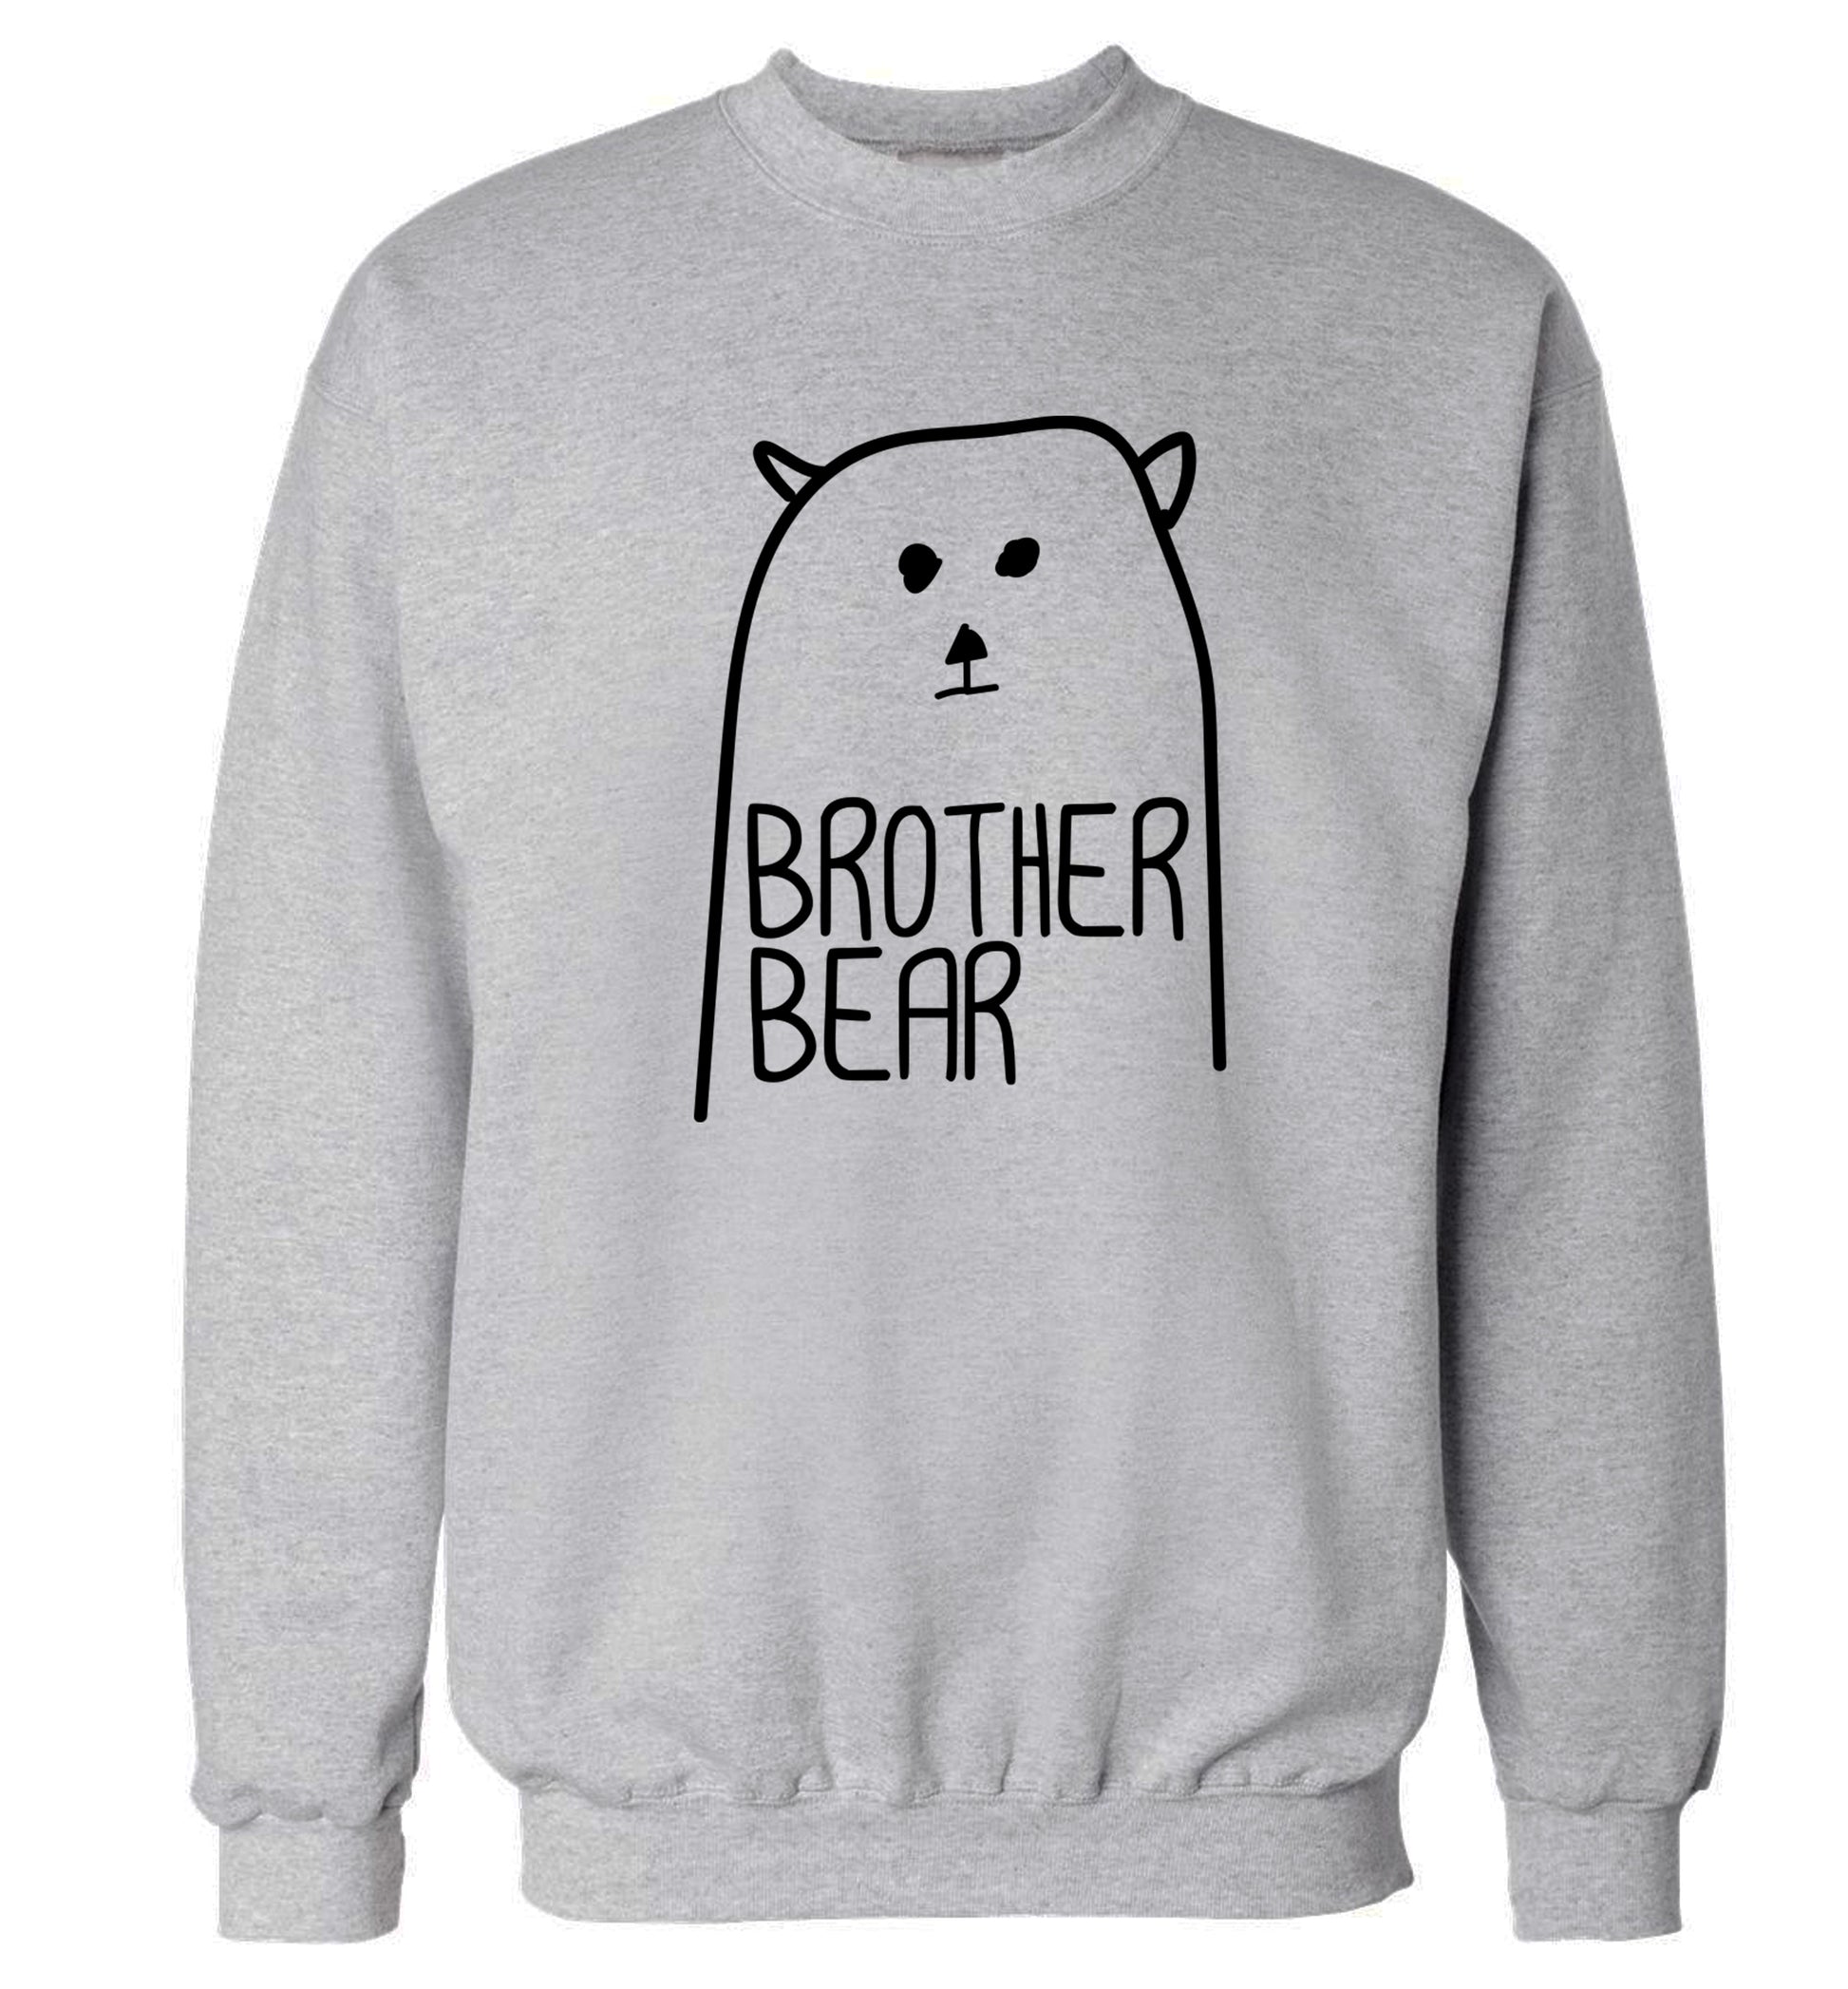 Brother bear Adult's unisex grey Sweater 2XL